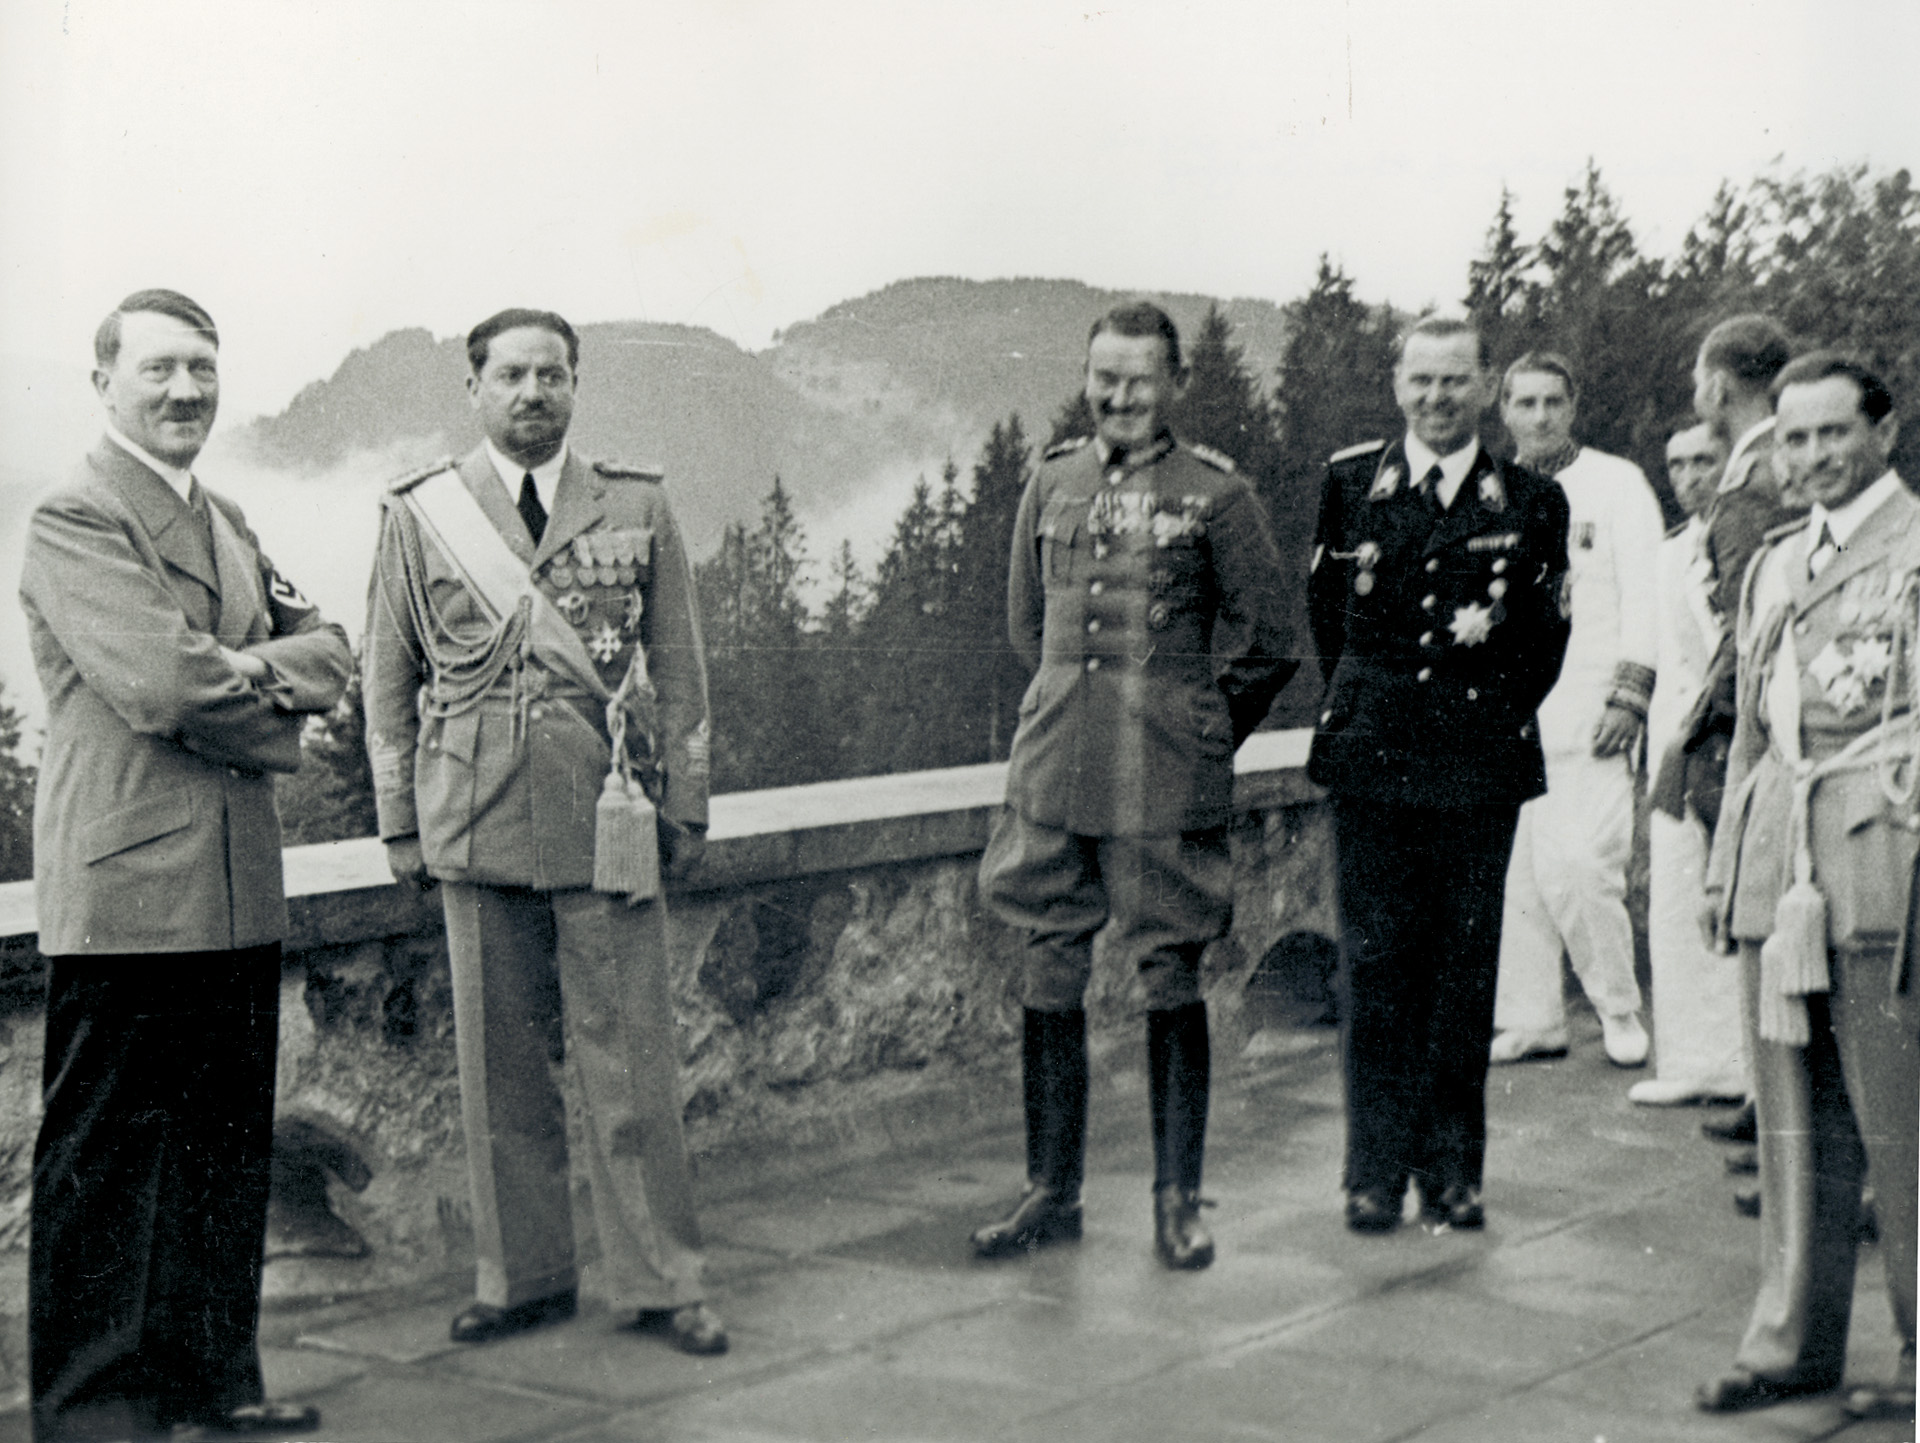 Italian Air Marshal Italo Balbo (second from left) poses with German hosts at the Berghof, including Hitler (left), Ritter von Schobert (center), and black-uniformed SS General Julius Schraub.